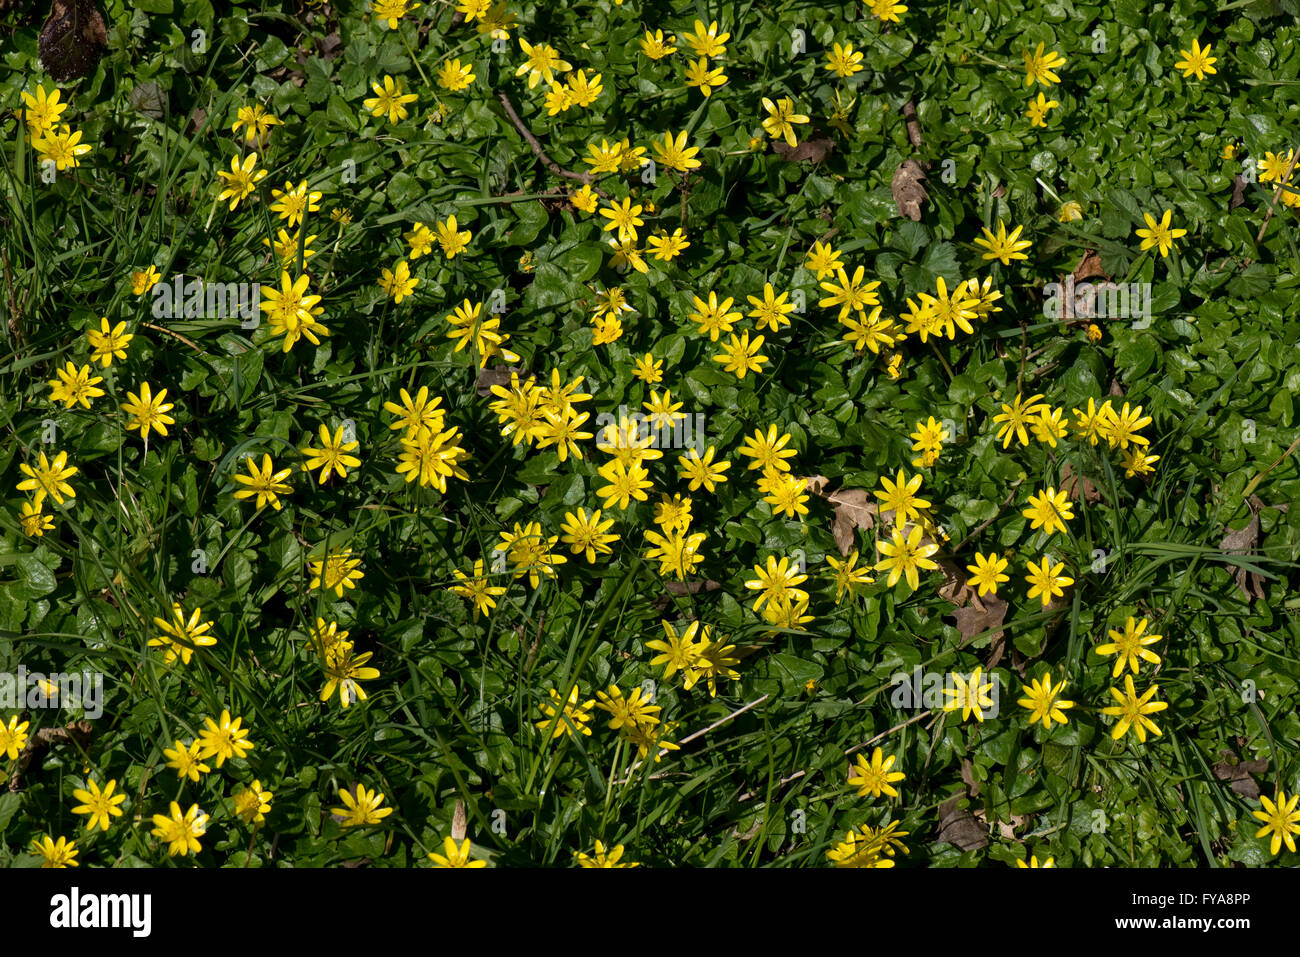 Lesser celandines, Ficaria verna, yellow flowering spring buttercup-like plant Stock Photo